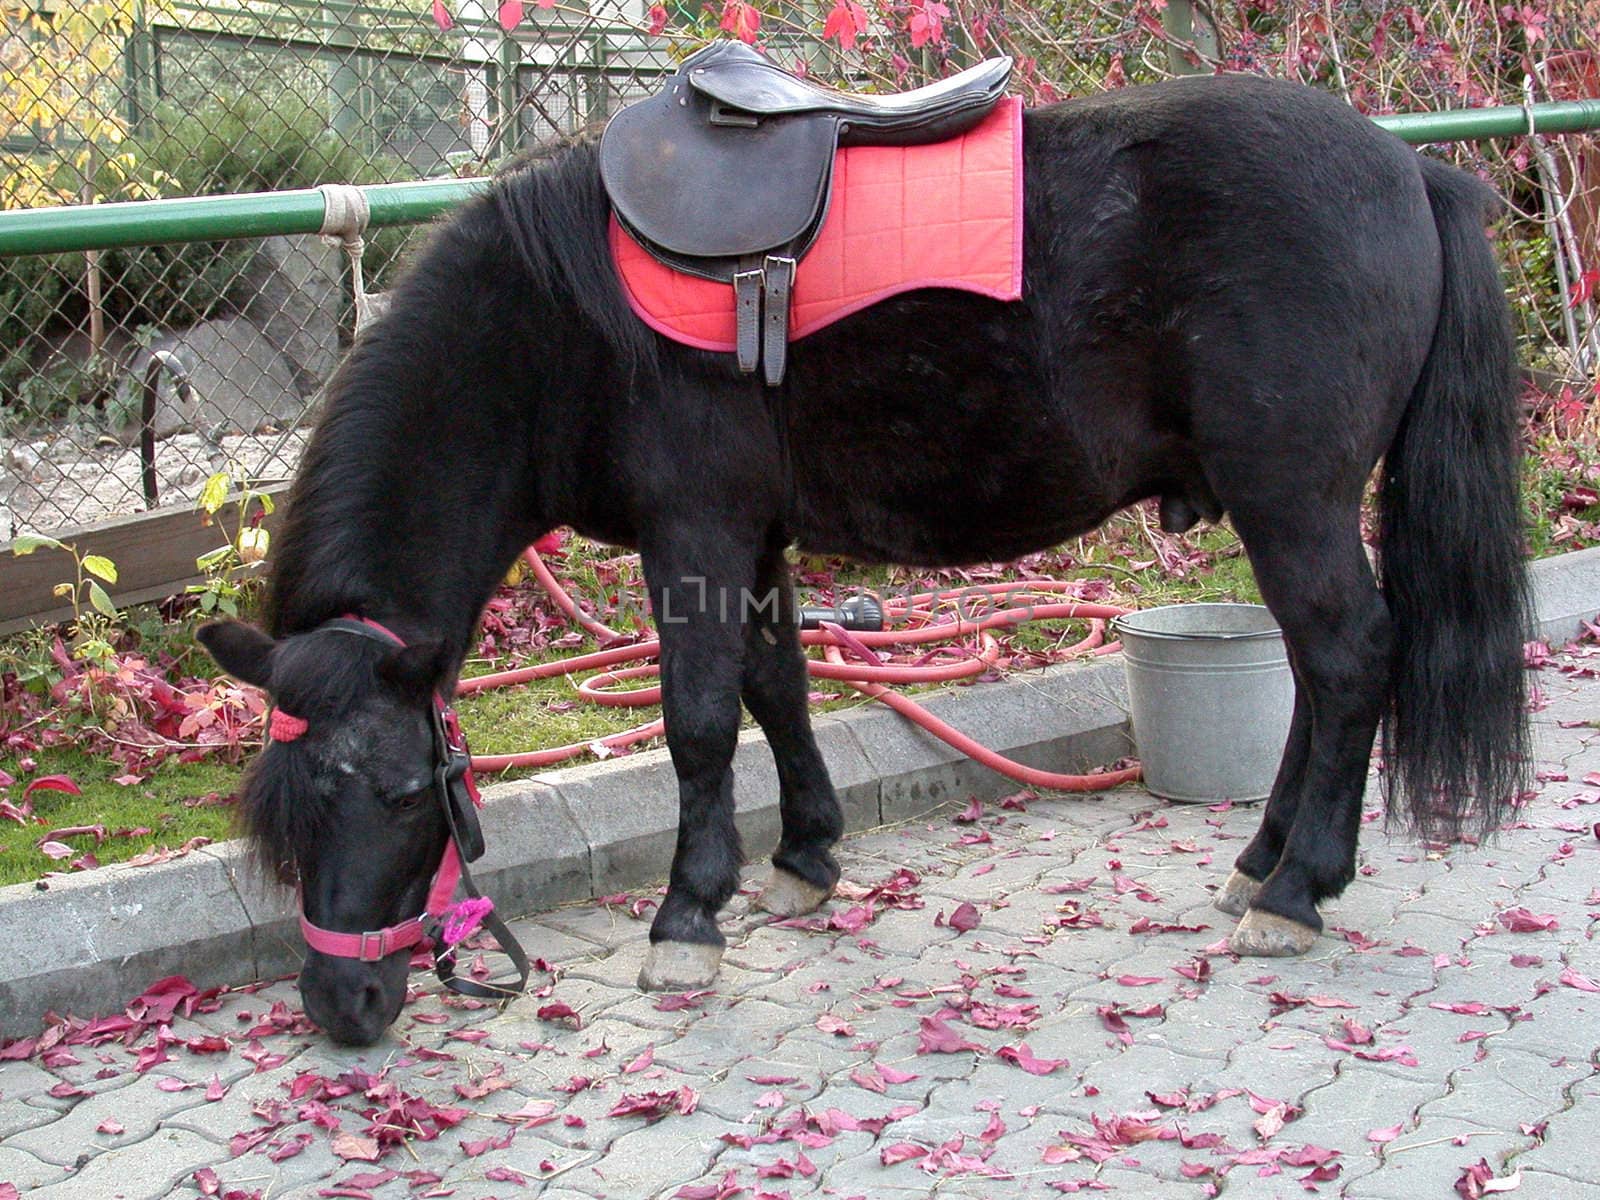 The pony for entertainment of children in a zoo